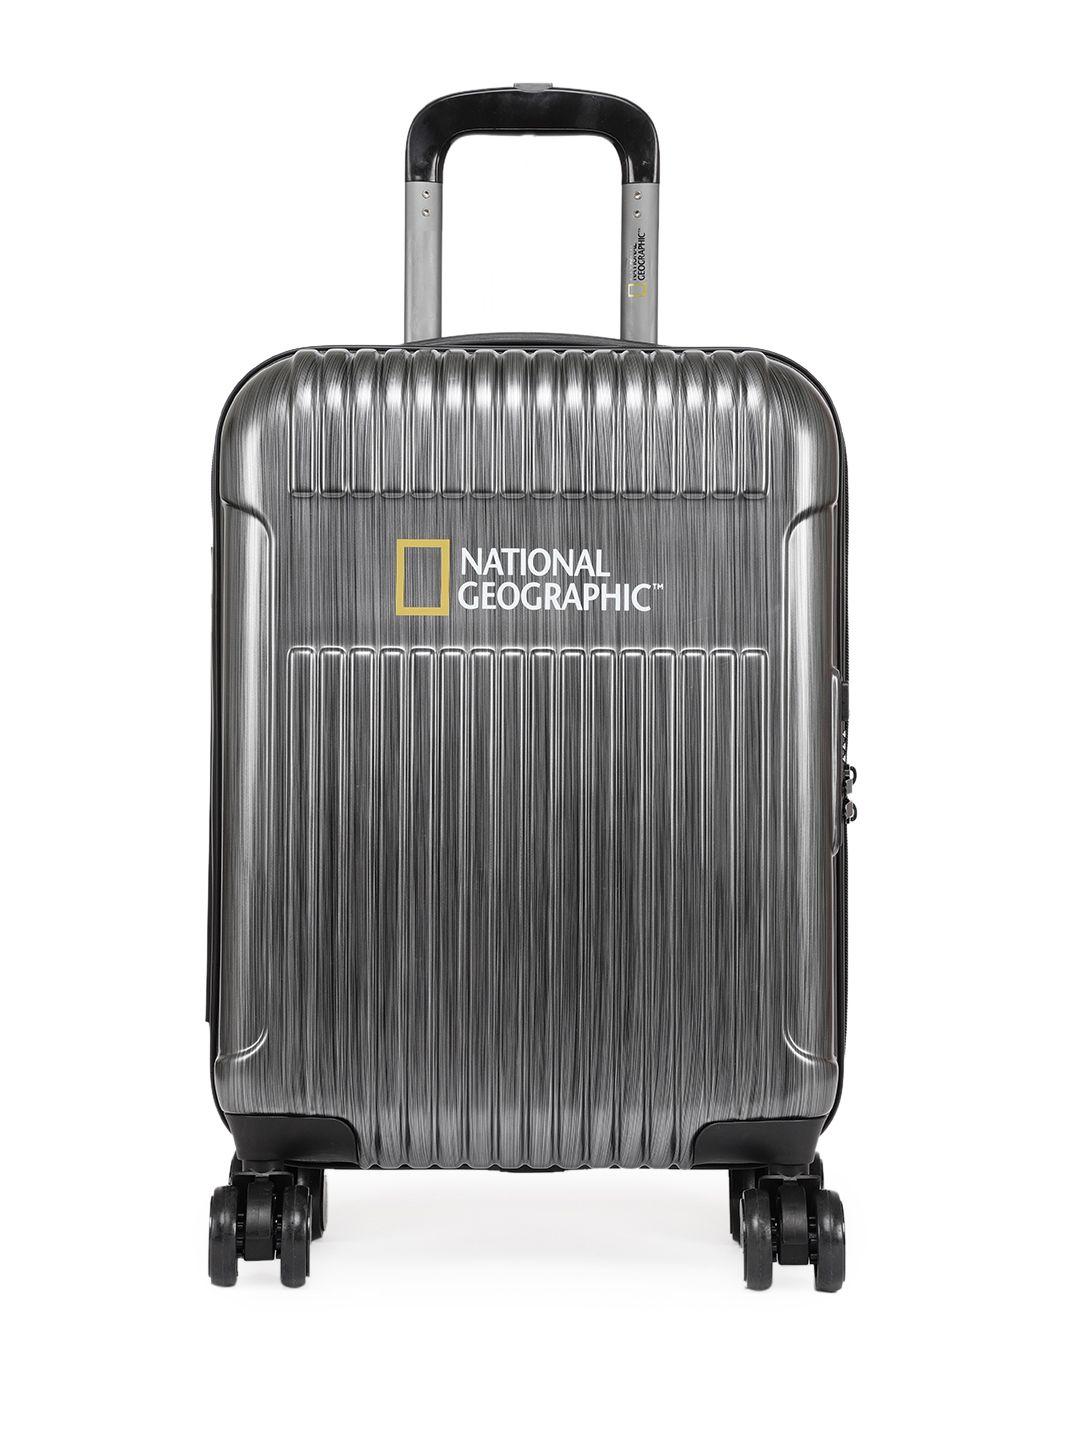 national geographic unisex metallic patterned transit cabin trolley suitcase